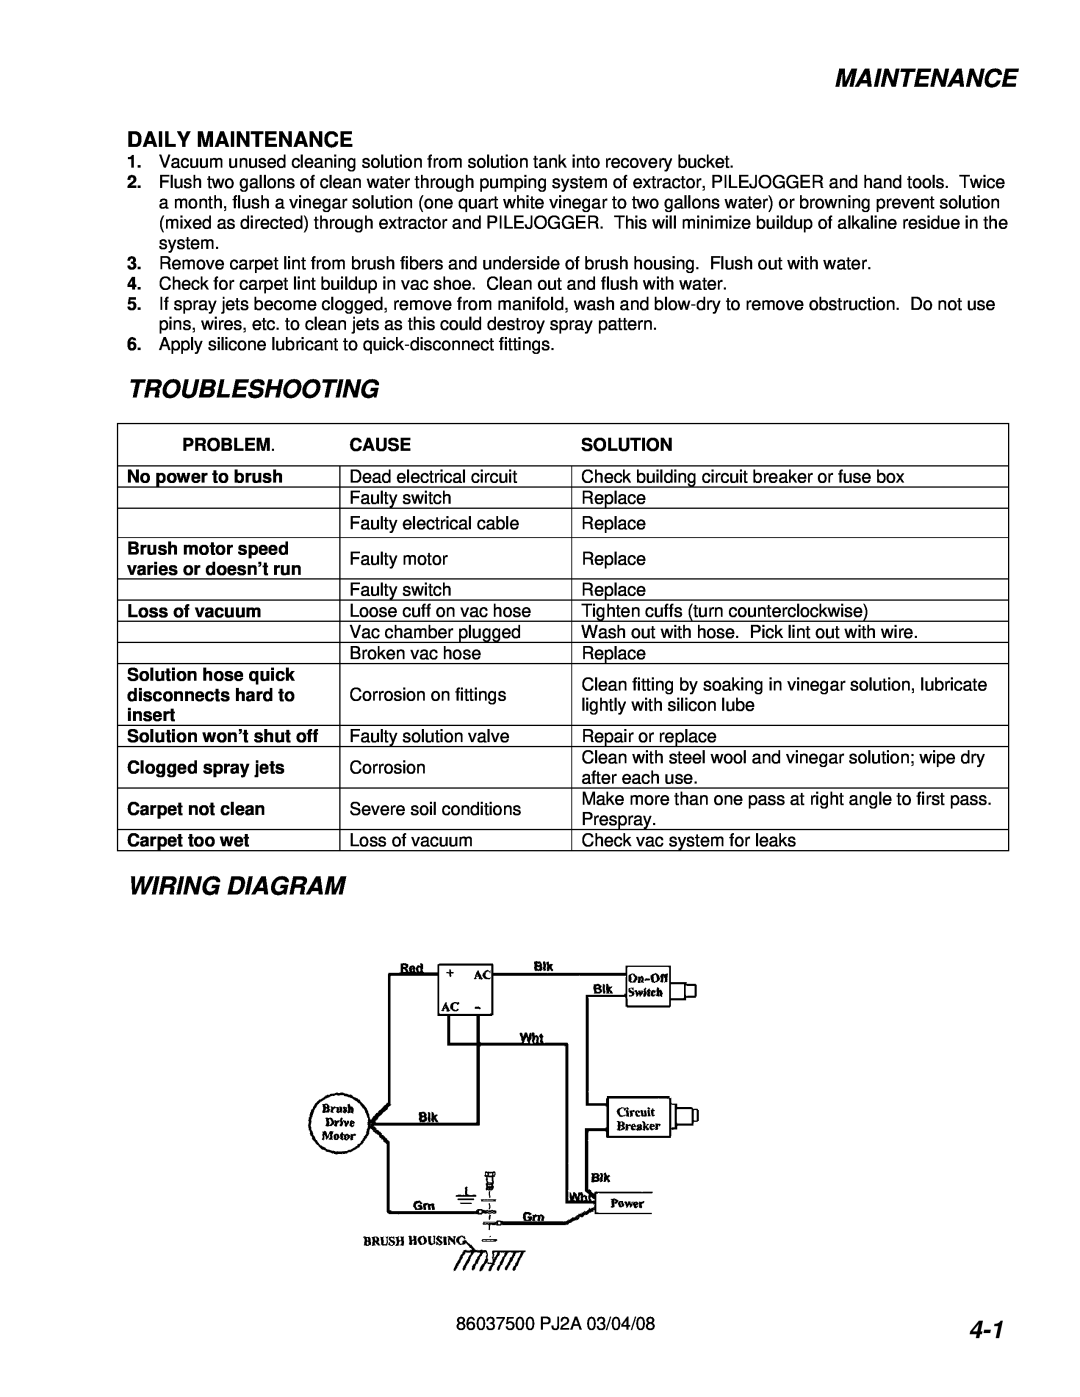 Windsor PJ2AIE operating instructions Troubleshooting, Wiring Diagram, Daily Maintenance 